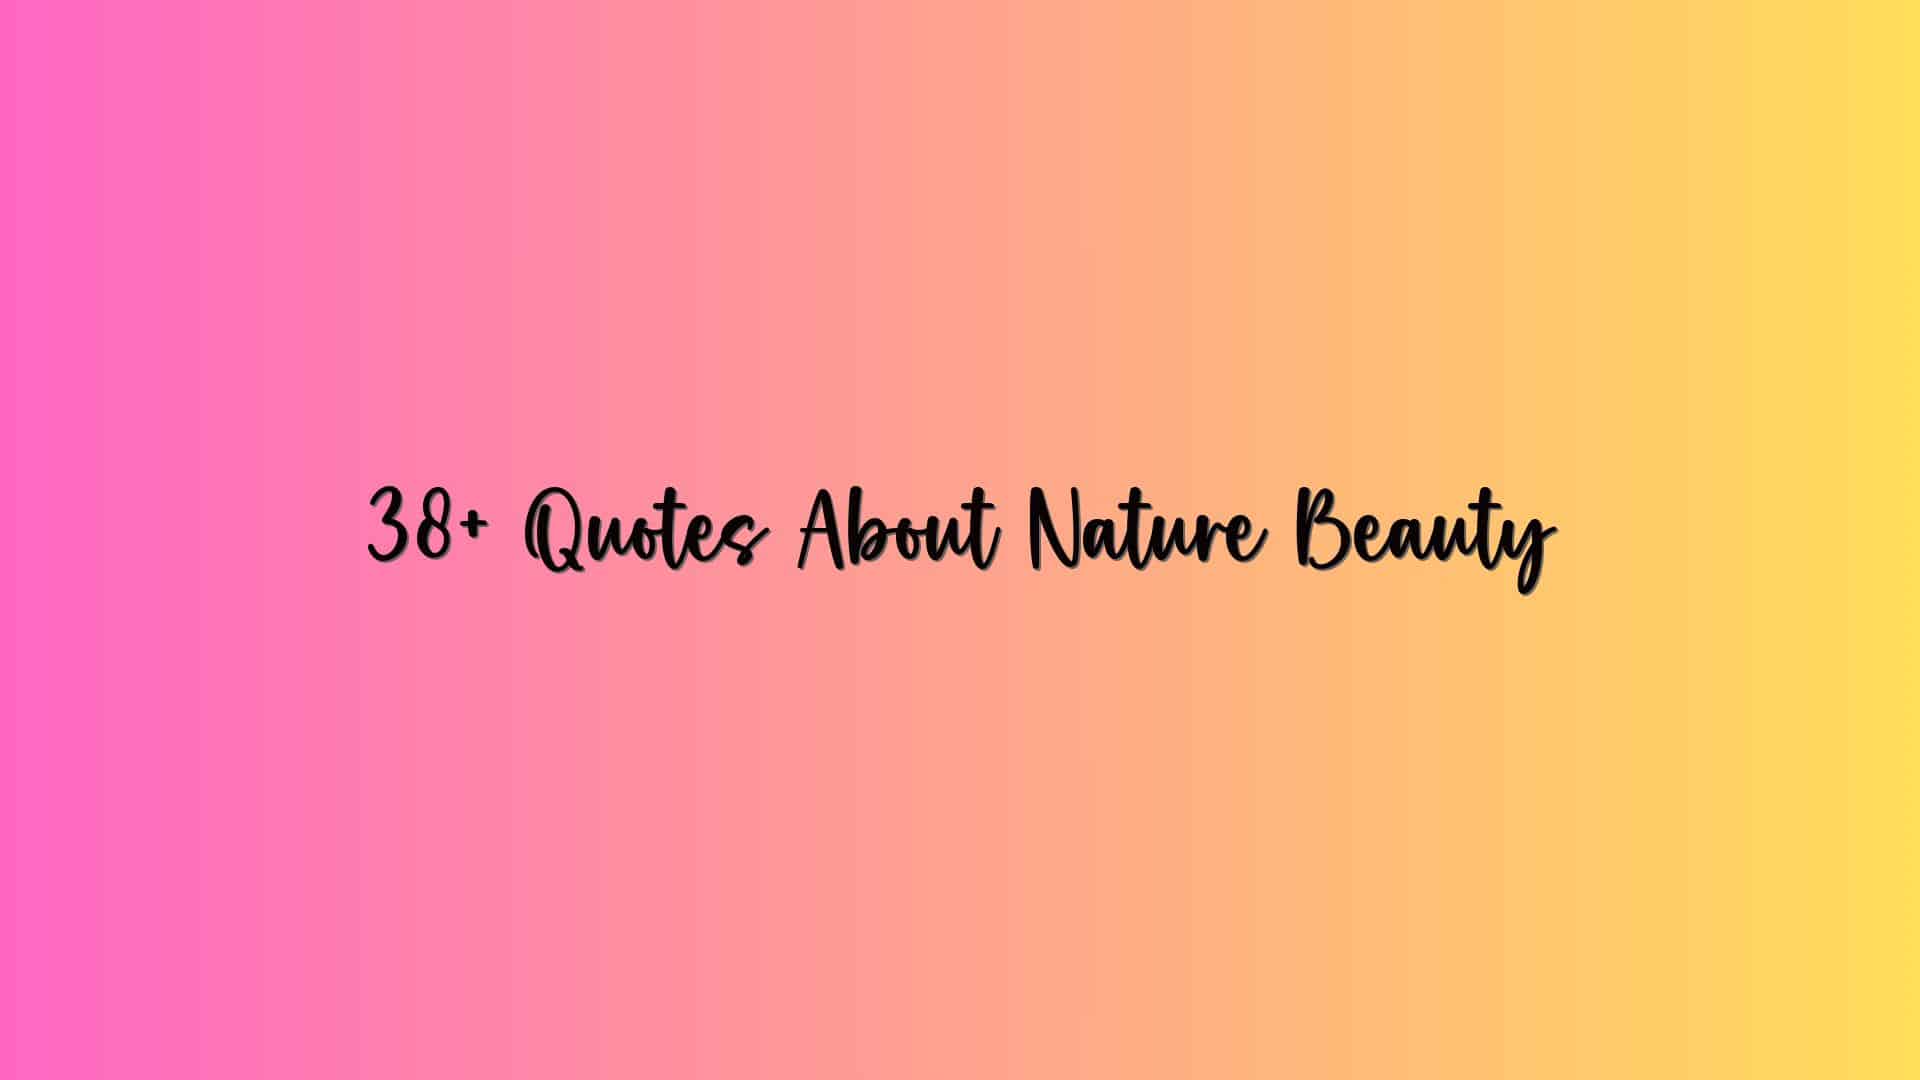 38+ Quotes About Nature Beauty